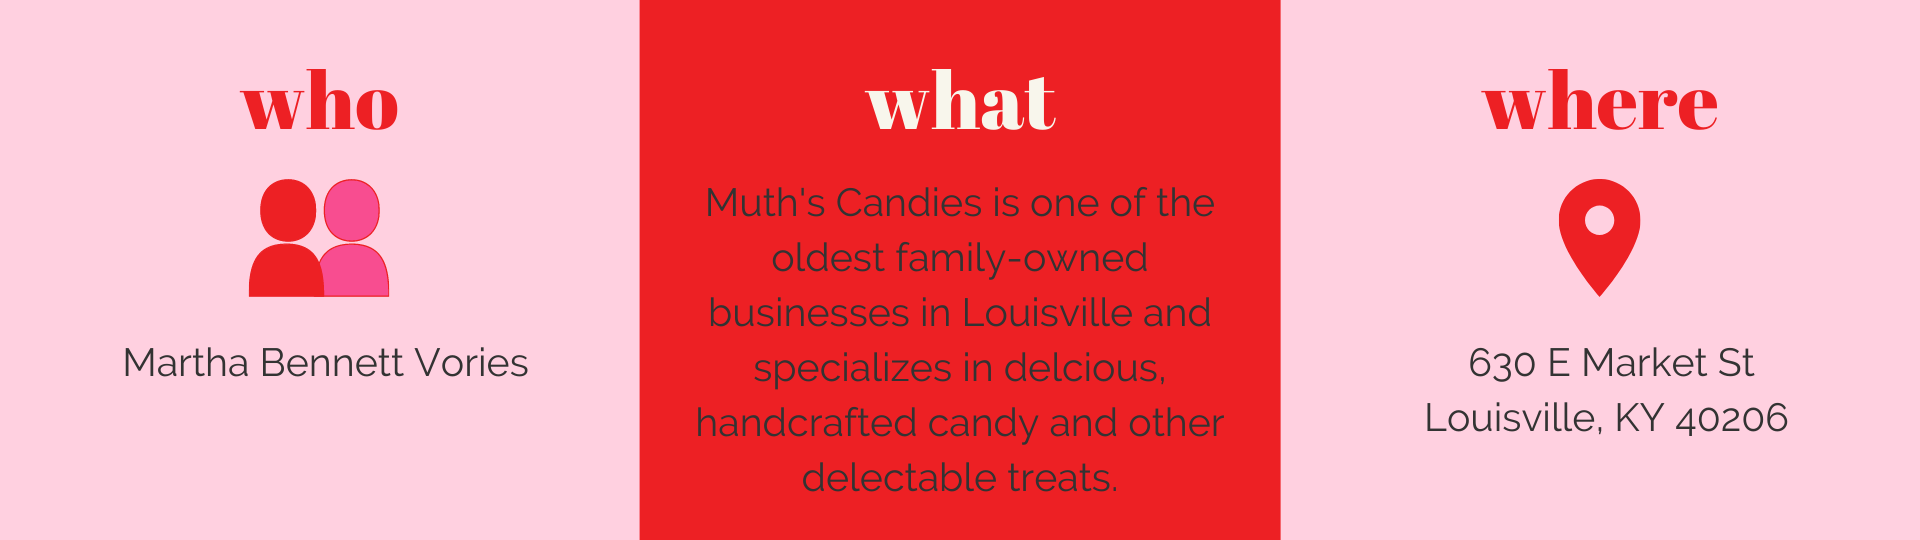 Muth's Candies is one of the stops on the Nulu woman-owned tour hosted by Woman-Owned Wallet